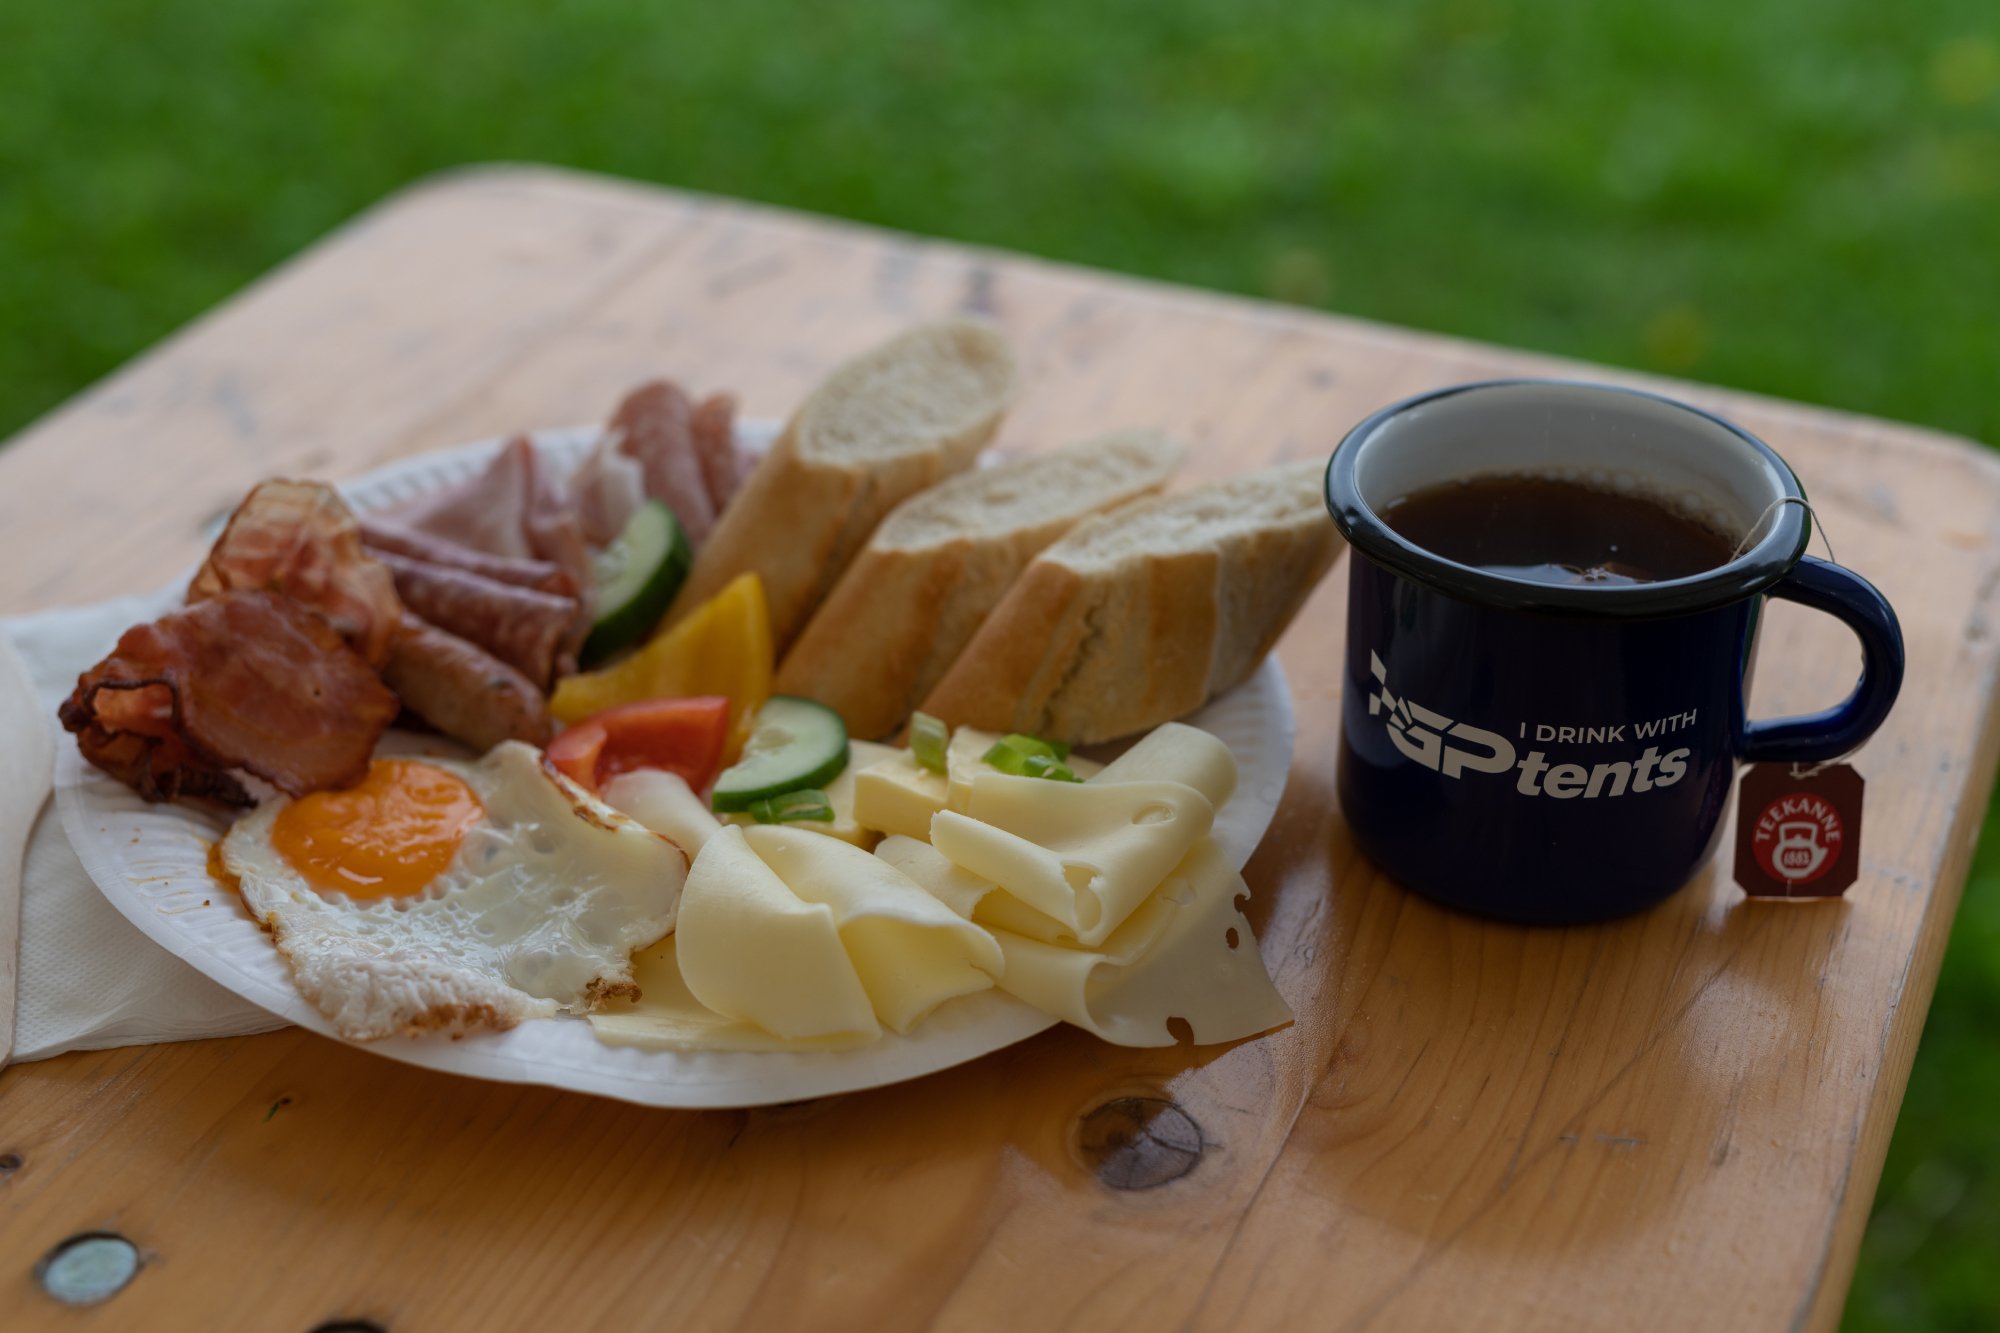 <p>Luxurious continental breakfast is included for the Hotel Tents guests.</p>
